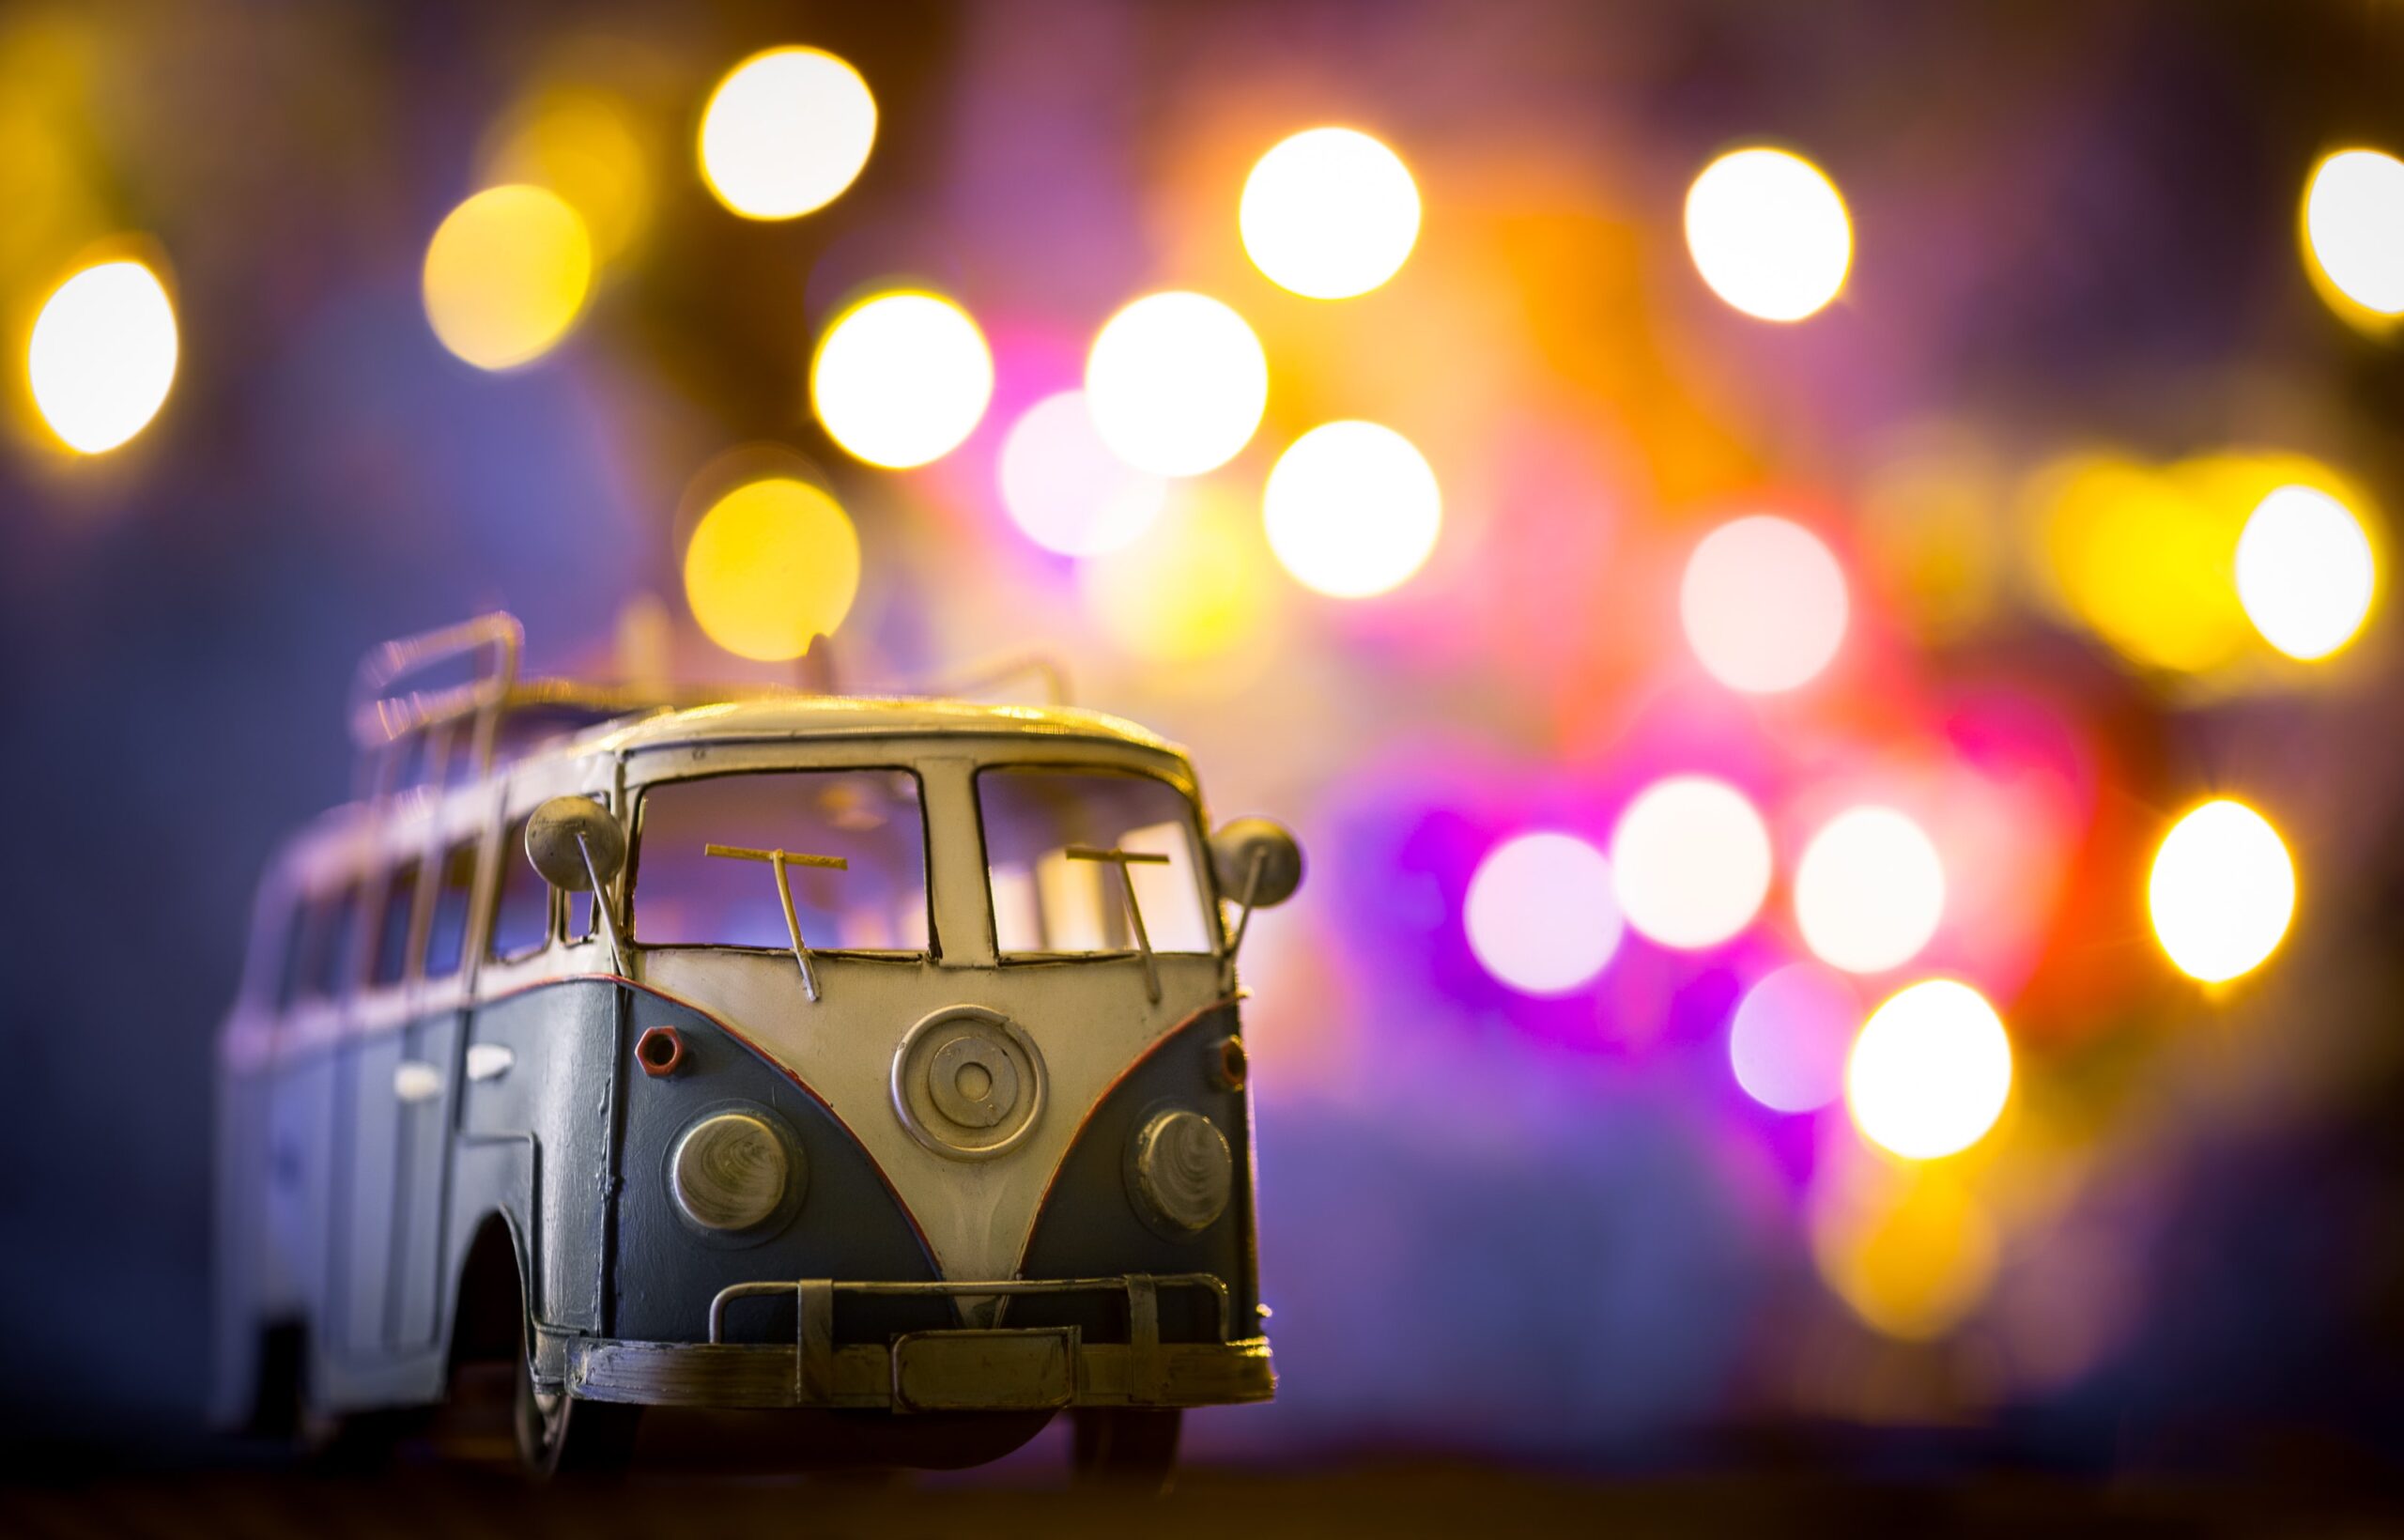 Jennifer Kemp | Clinical psychologist, author, trainer - Image of toy bus in front of sparkly lights